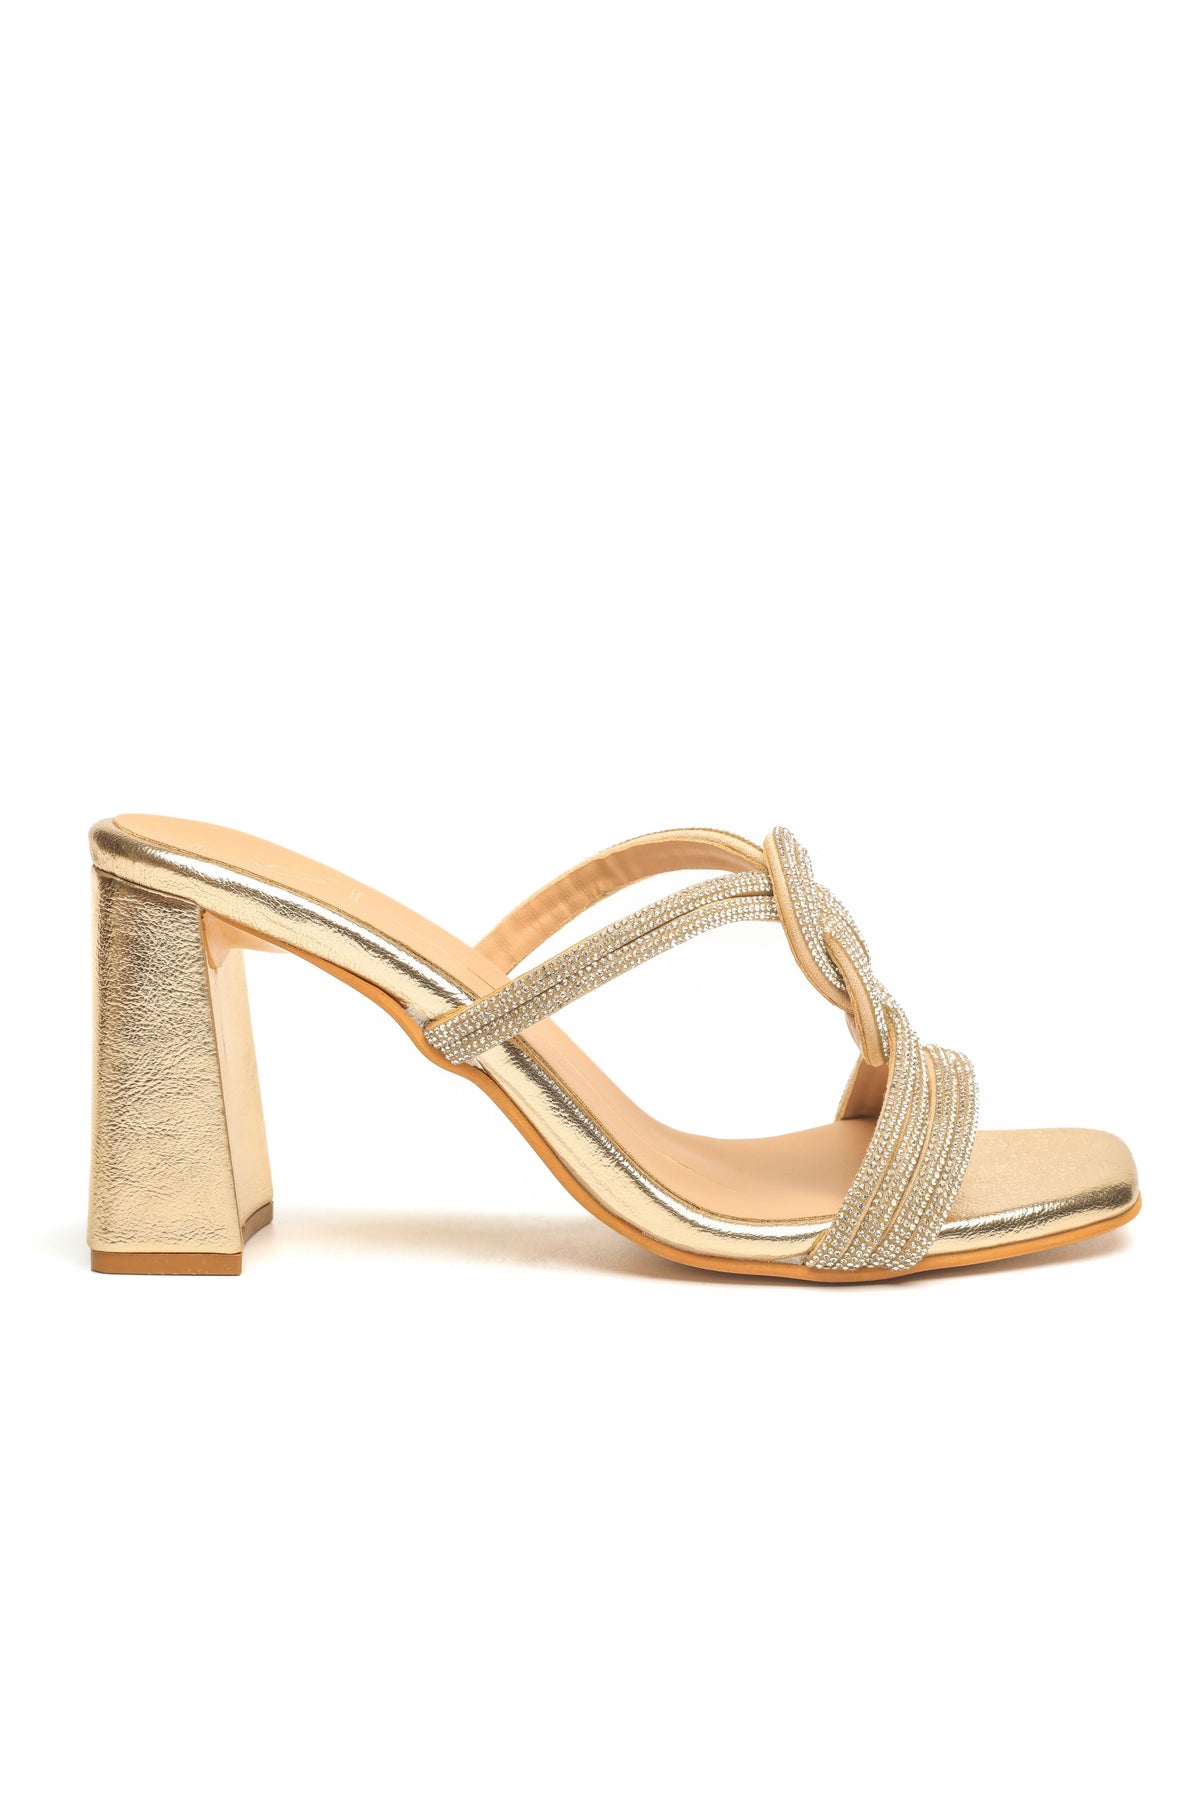 Gold Faux Leather Block Heel